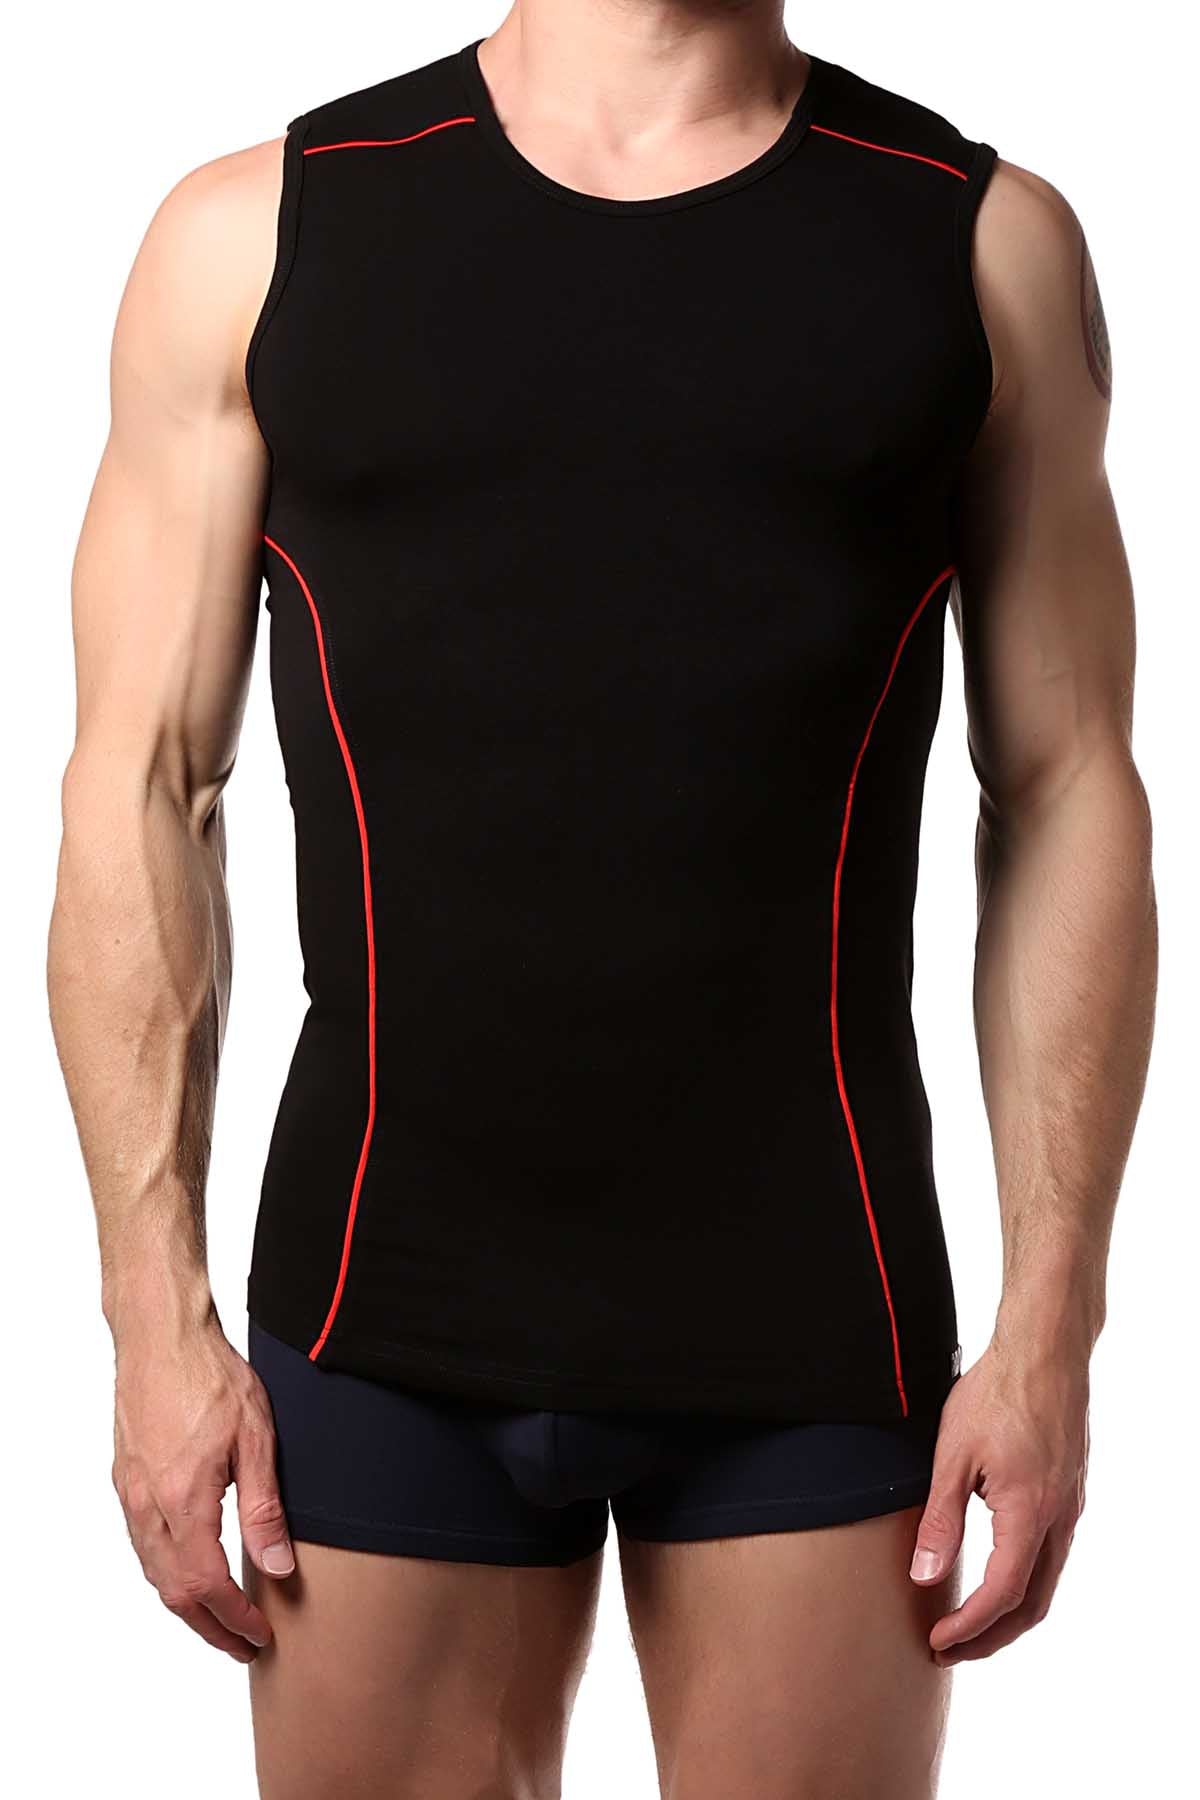 Doreanse Black/Red Athletic Muscle Tee